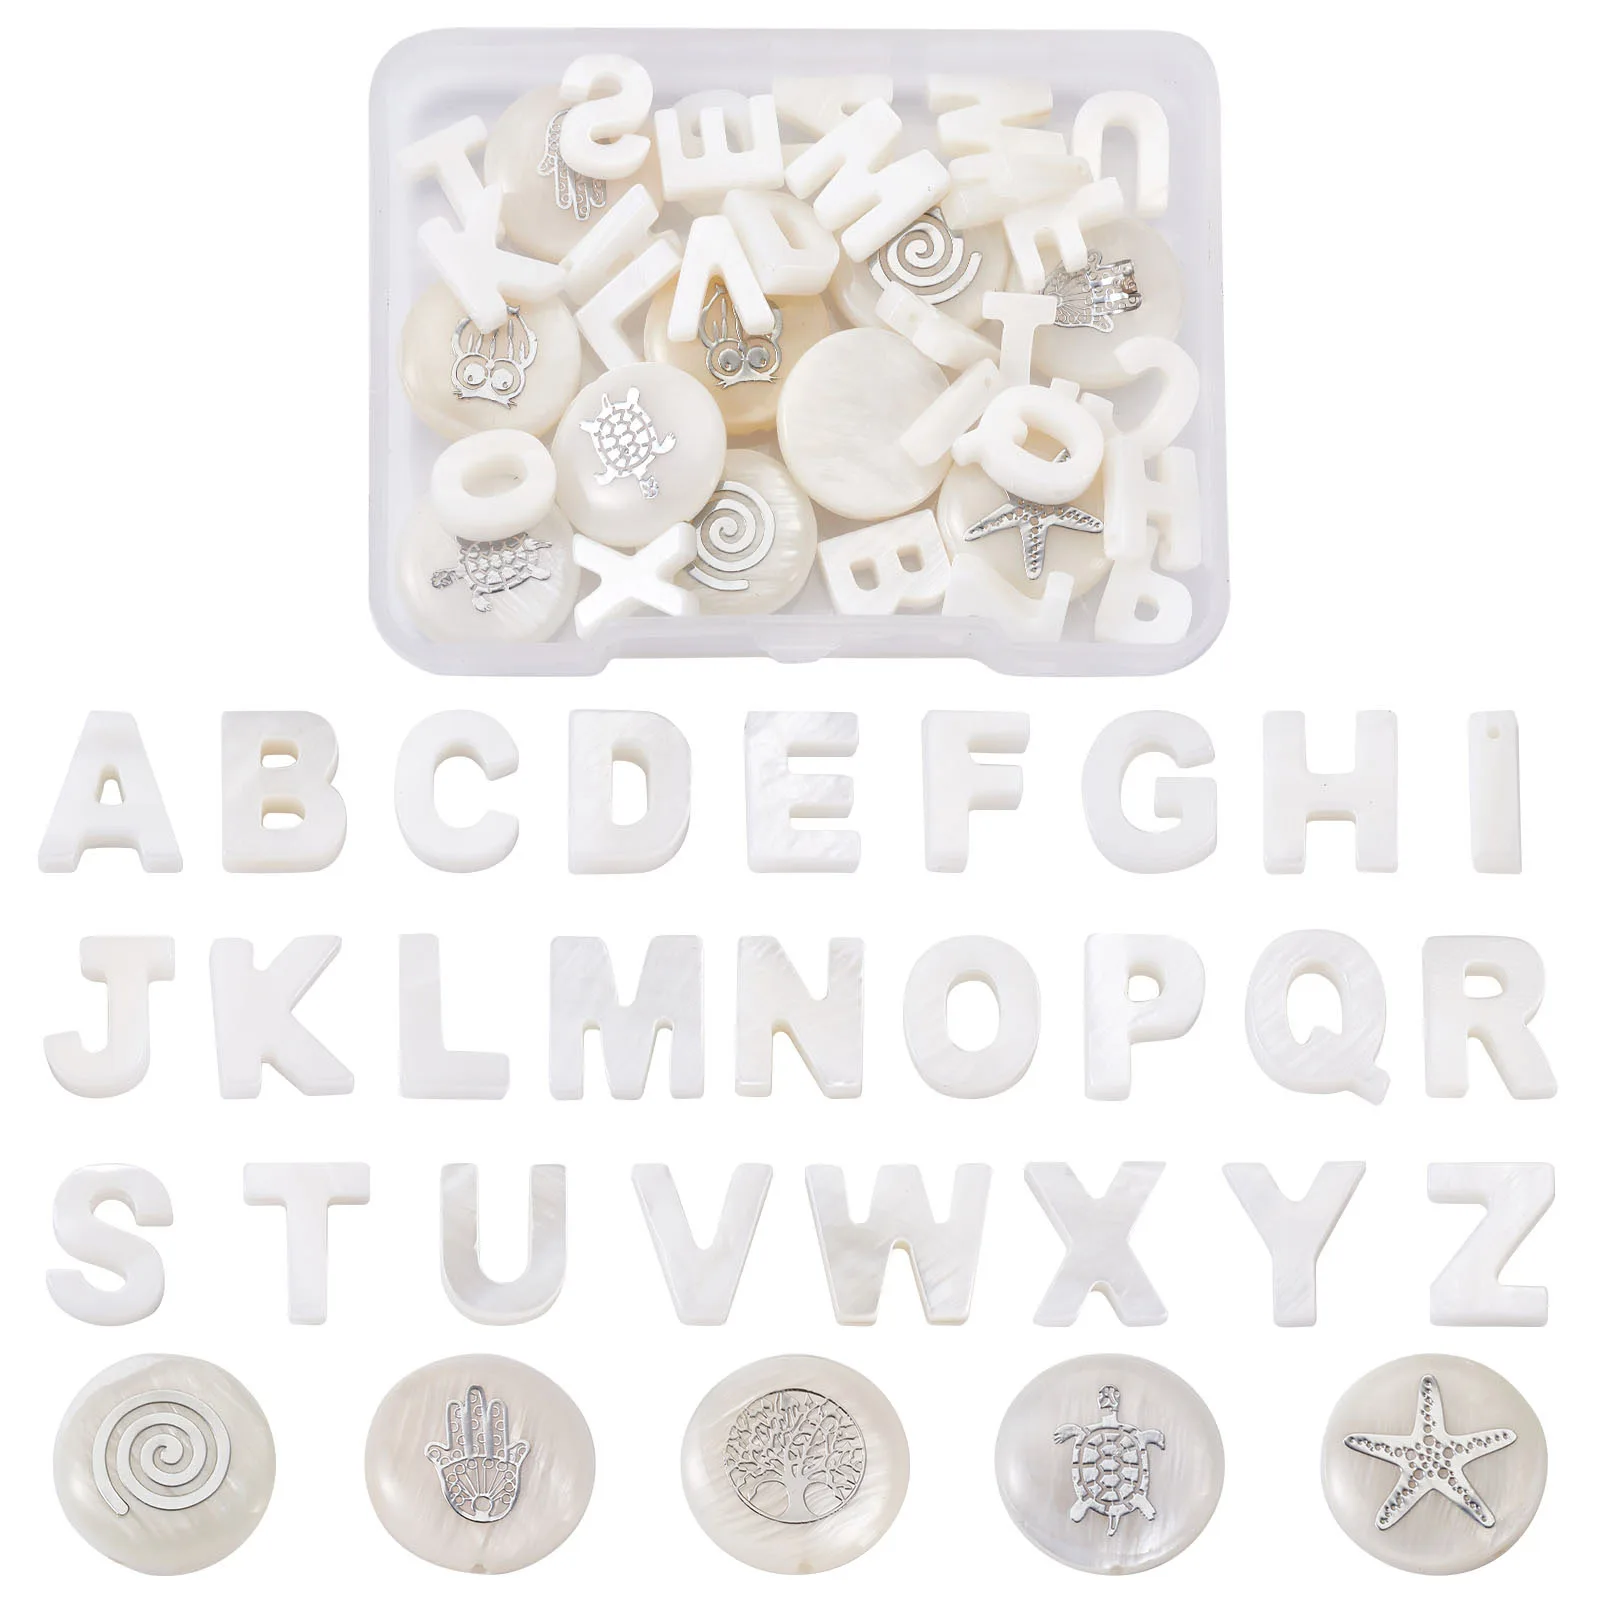 

36pcs/box Natural Freshwater Shell Alphabet Letter A~Z Beads Top Drilled Beads for jewelry making Bracelet Necklace Accessories